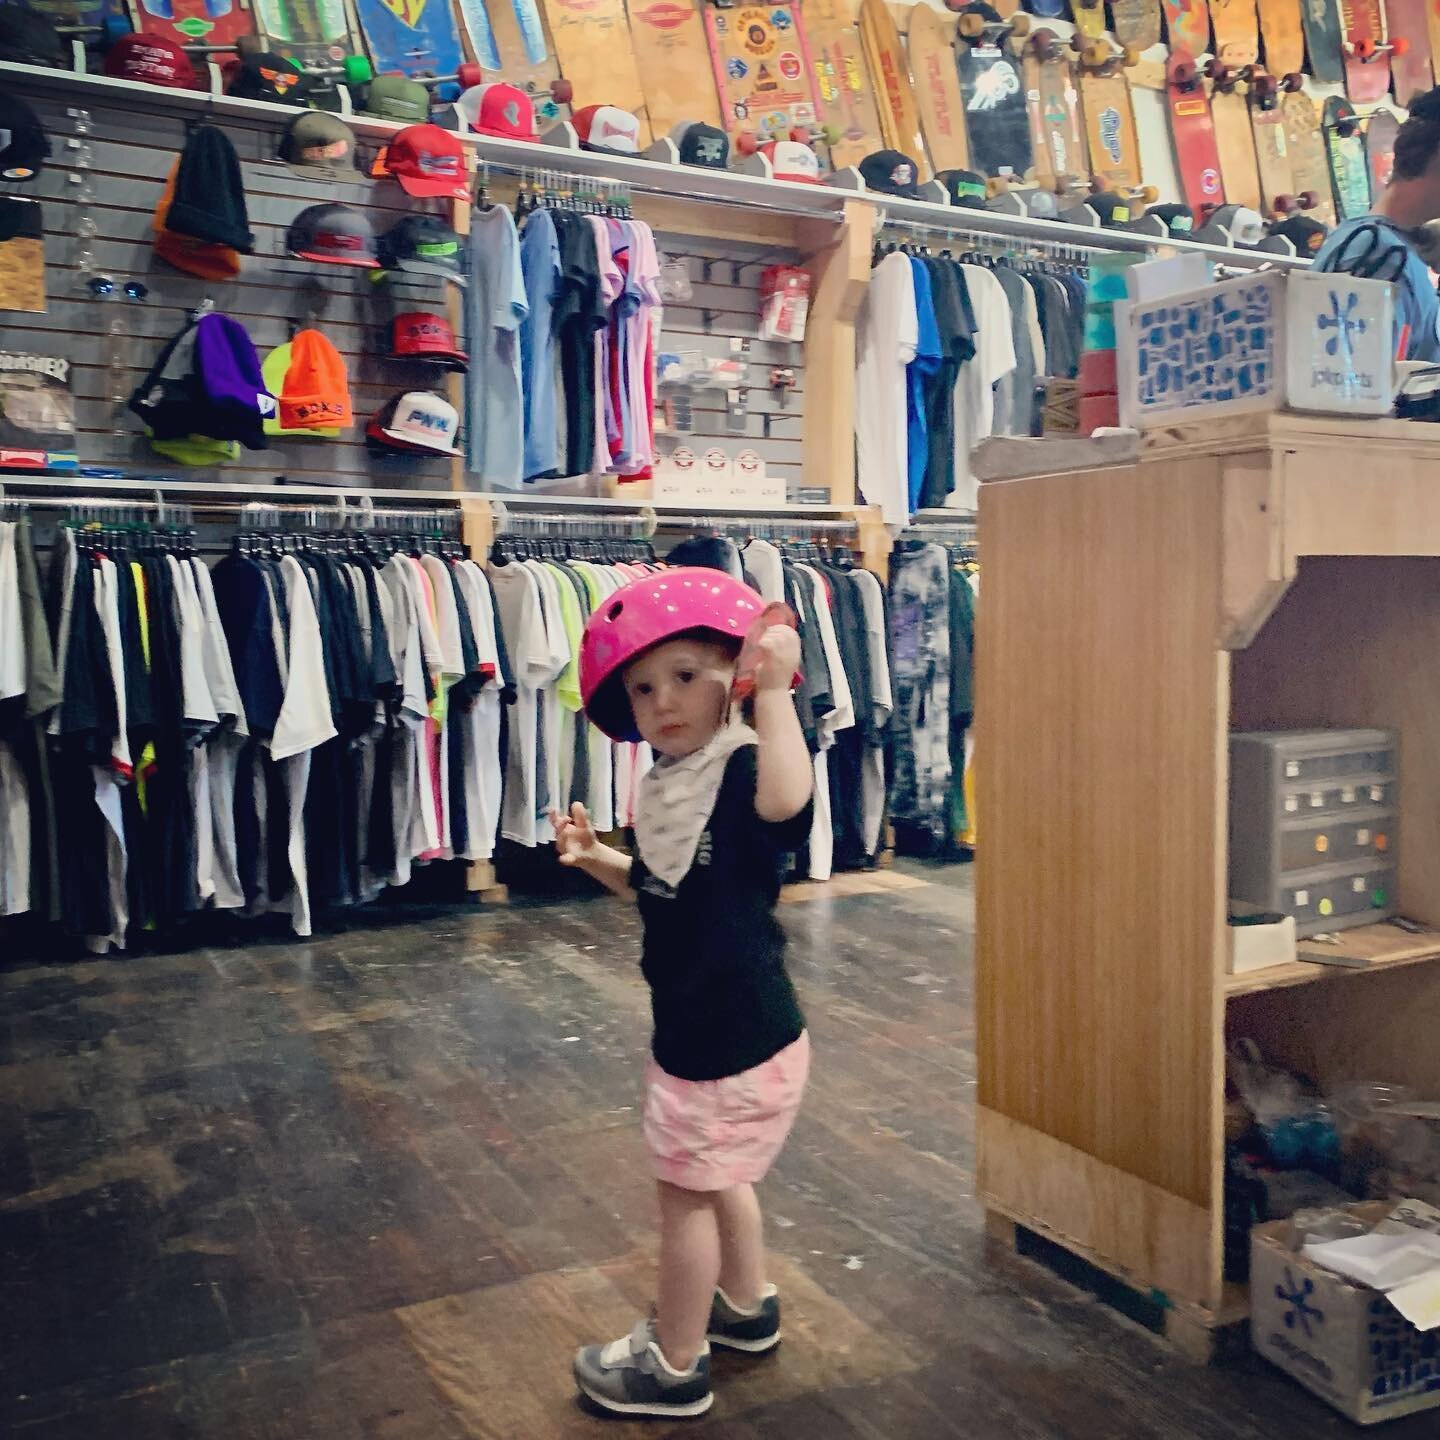 Today seemed like an appropriate day for Fiona&rsquo;s first skate shop visit. She ripped around @bdkboardshop for hours while papa chatted. She&rsquo;s a natural. Many snacks were consumed. #goskateday